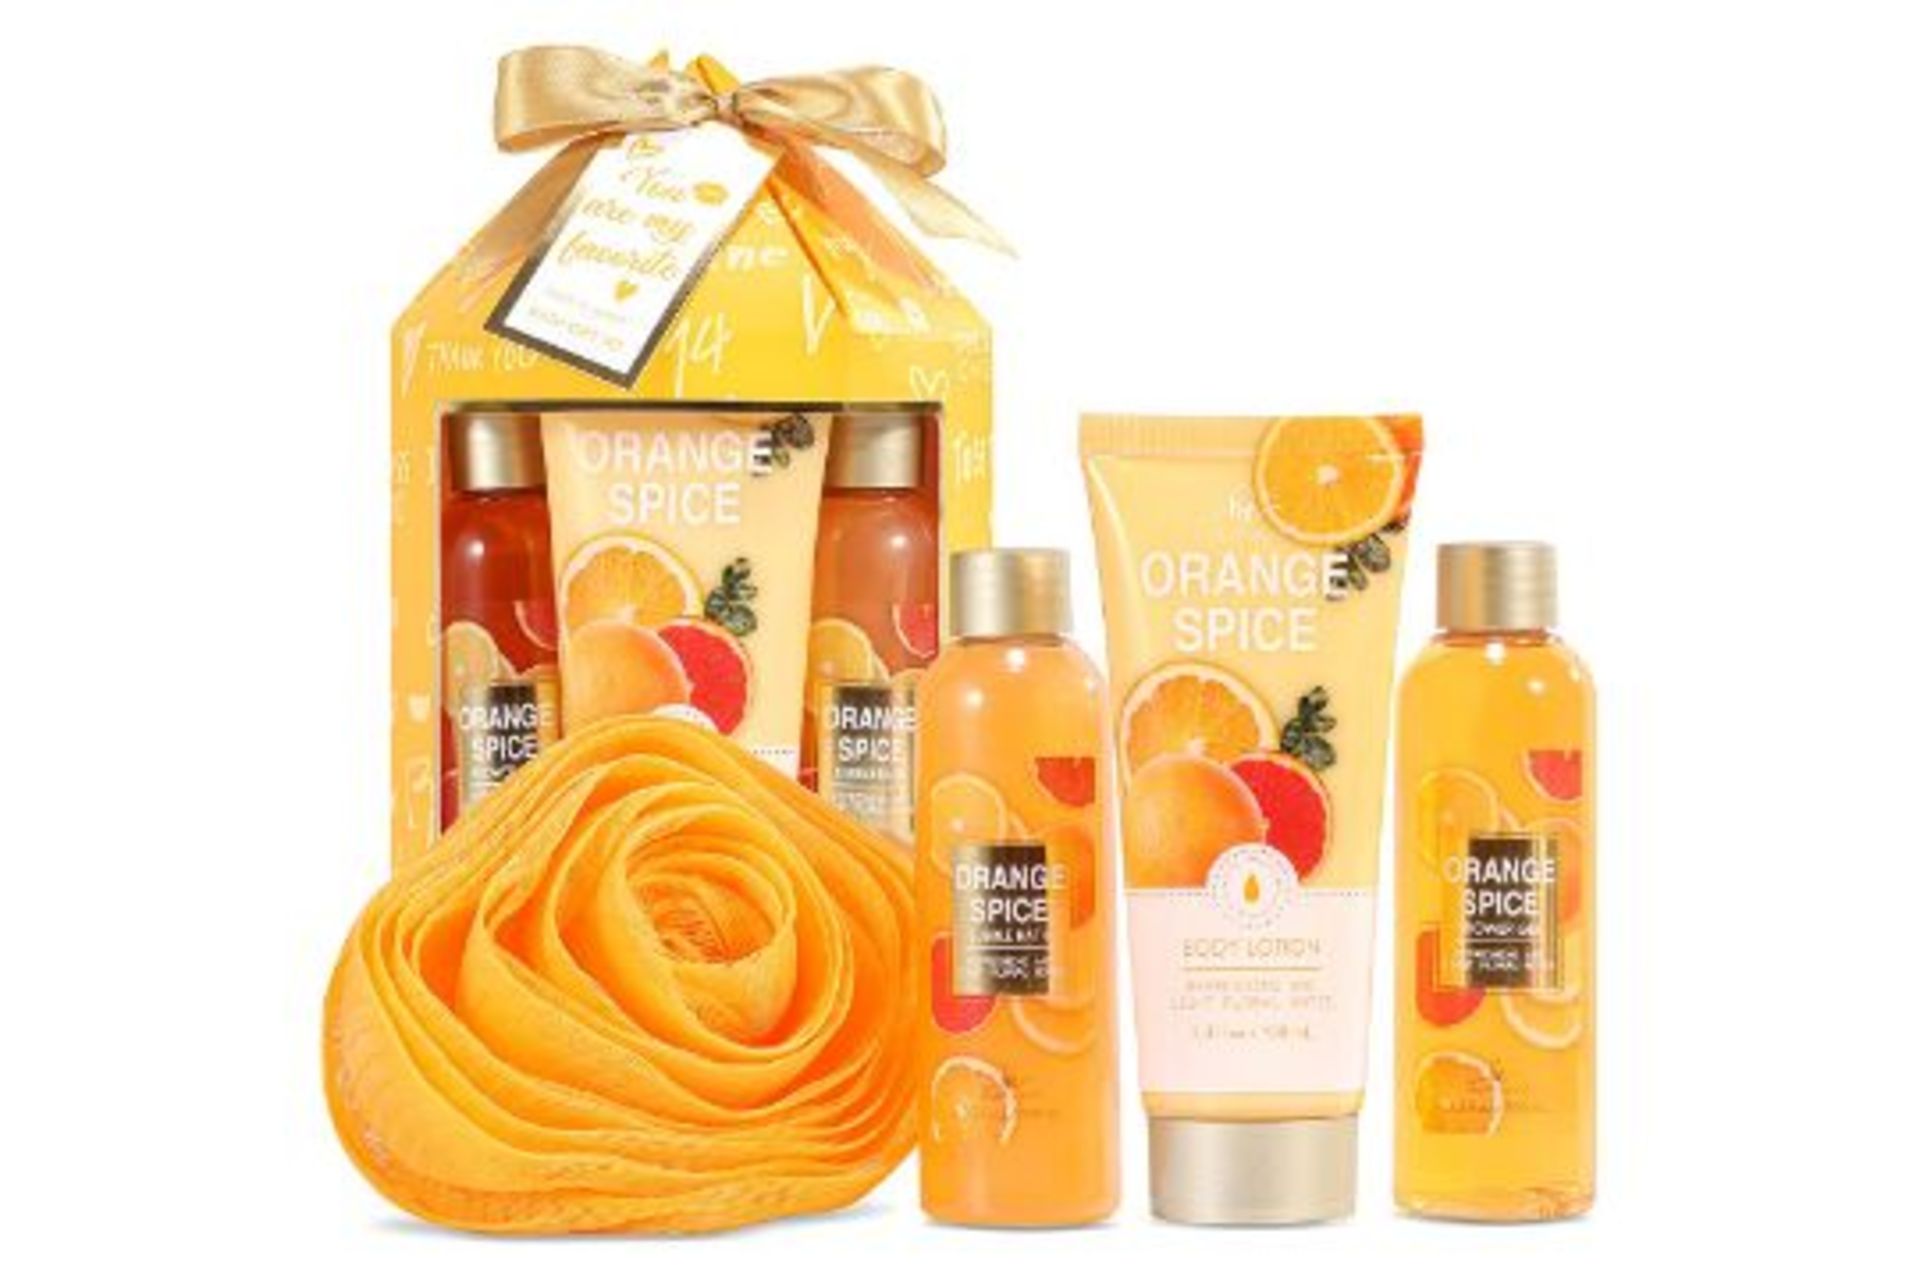 PALLET TO CONTAIN 120 x NEW PACKAGED 4 Piece B&E Orange Spice Spa Gift Sets (SKU:BE-BP-074). ??